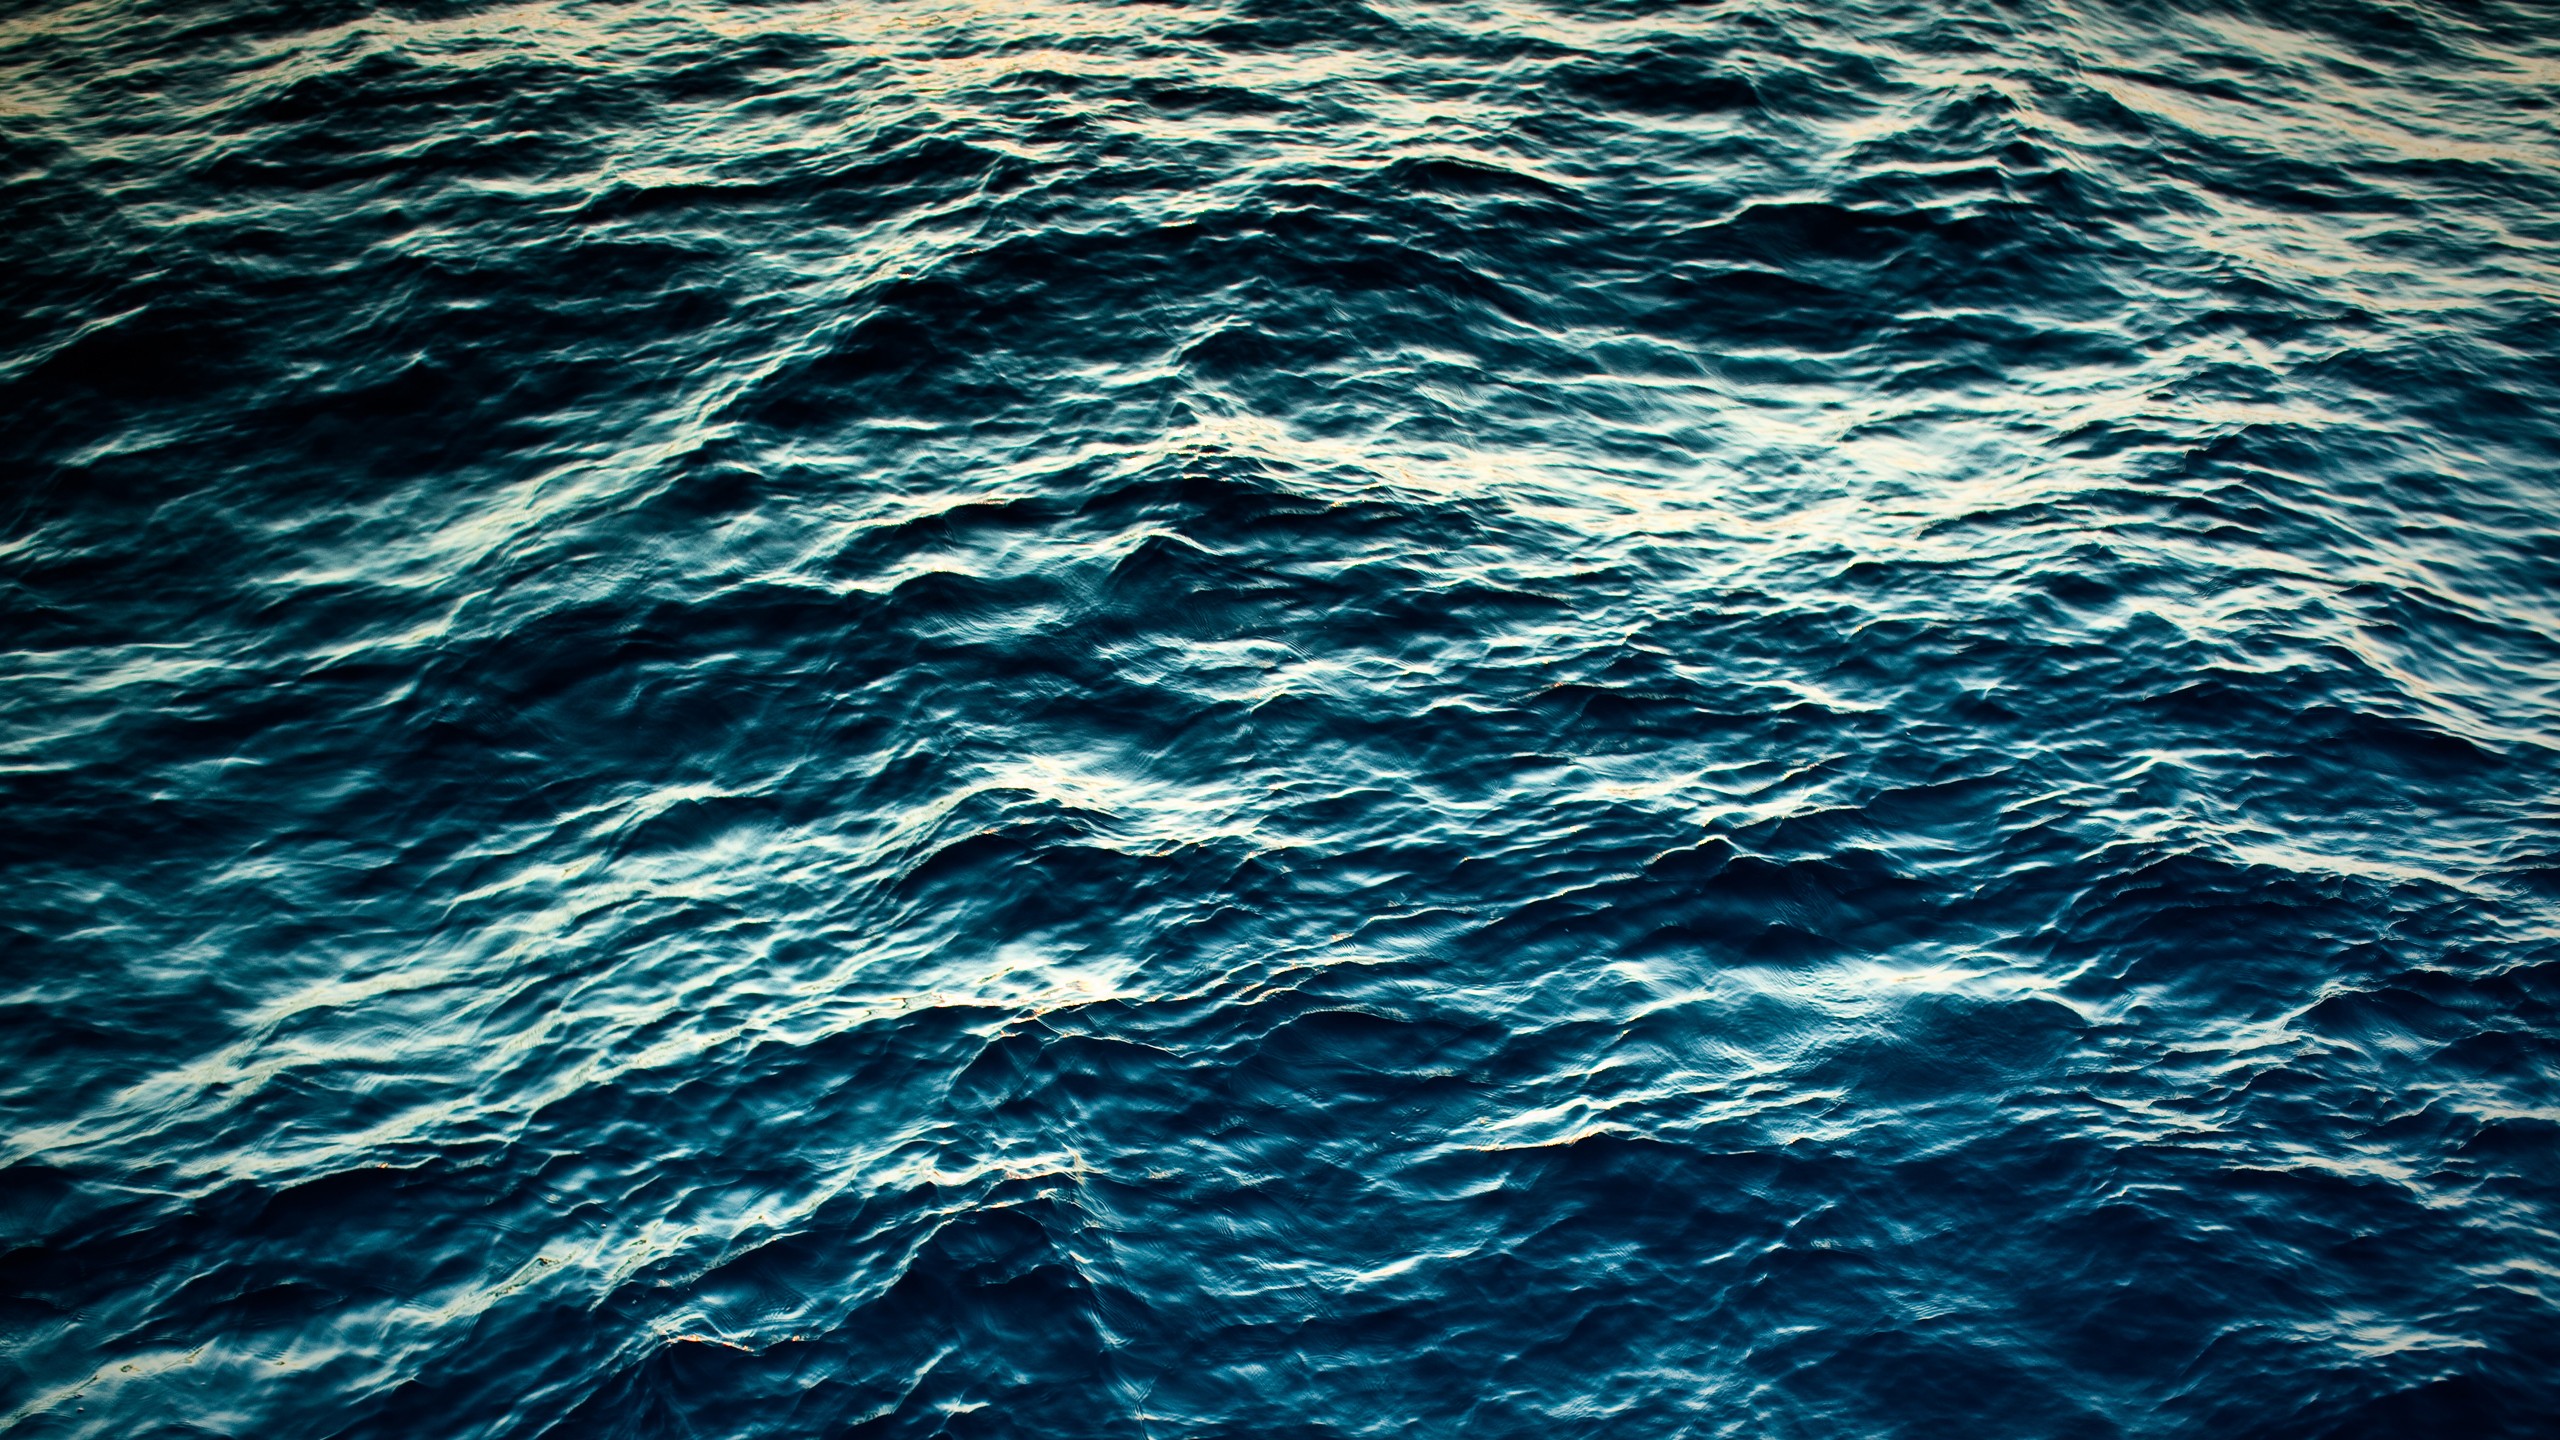 Wallpaper The Calm Water Of Ocean For Inch Imac